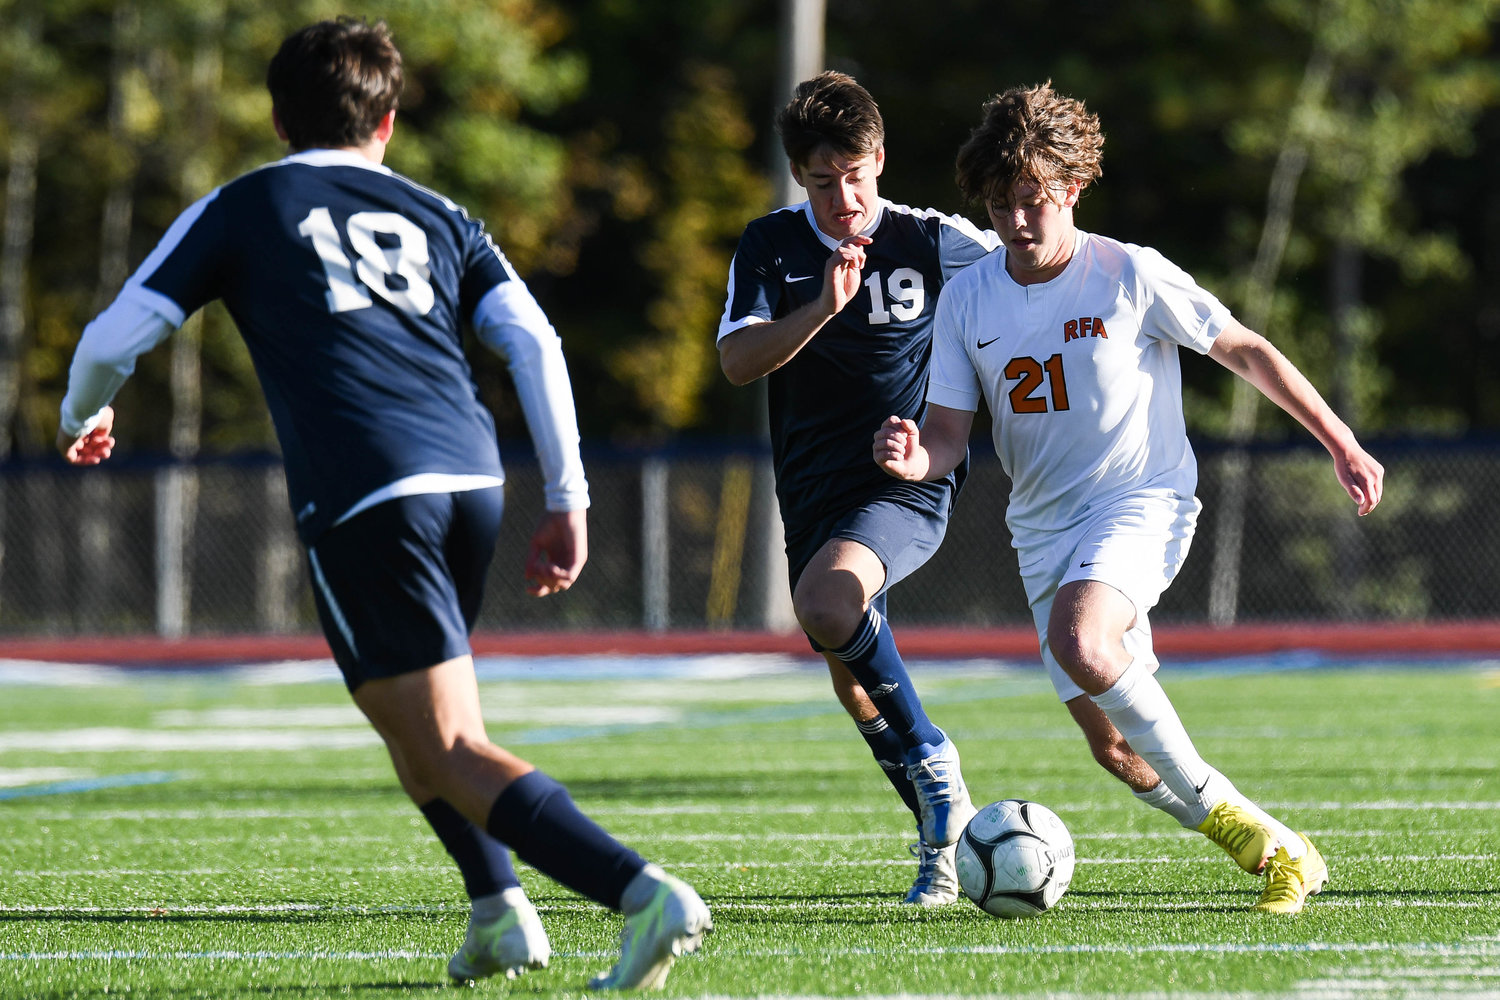 Rome Free Academy's Jack Rushton, right, moves the ball up the field as Central Valley Academy's Ryan Donahue (18) and Colin Cave (19) defend during the game on Thursday in Ilion. RFA won 2-0.